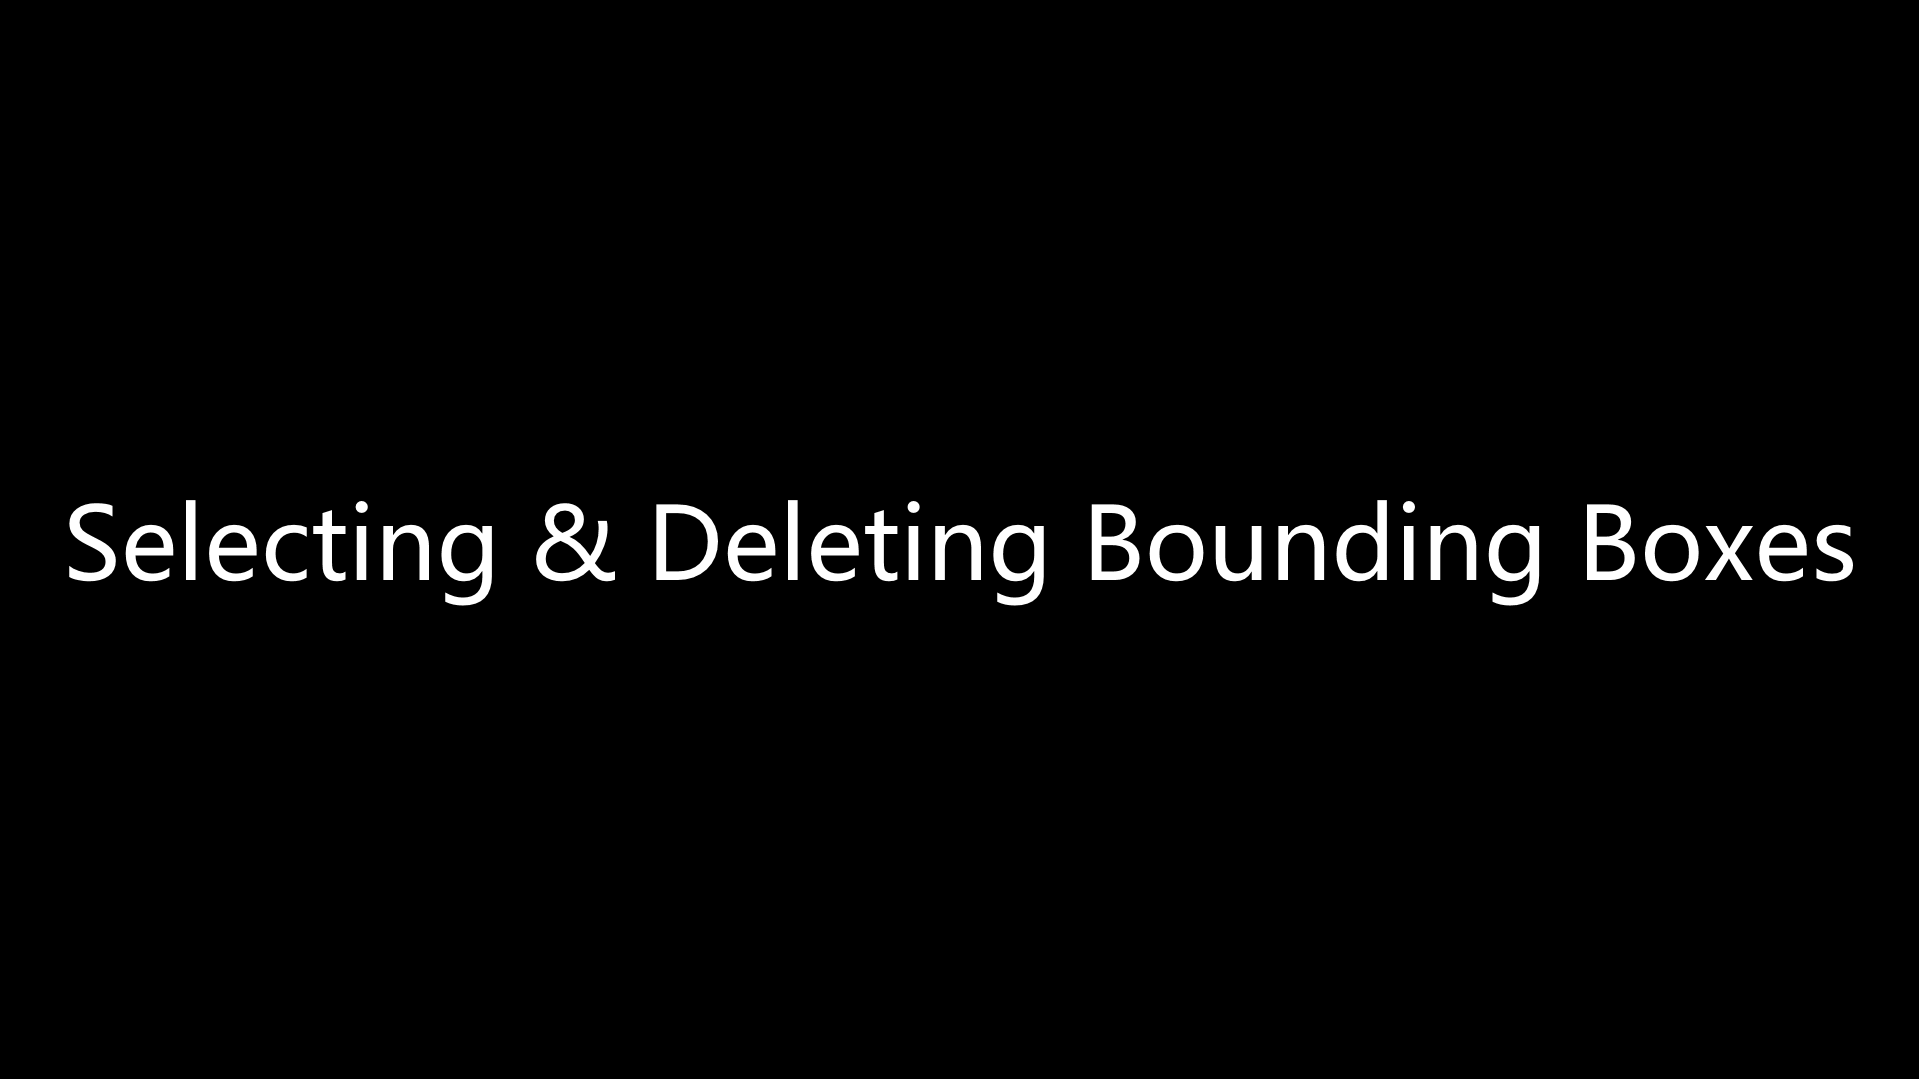 Labeling bounding boxes